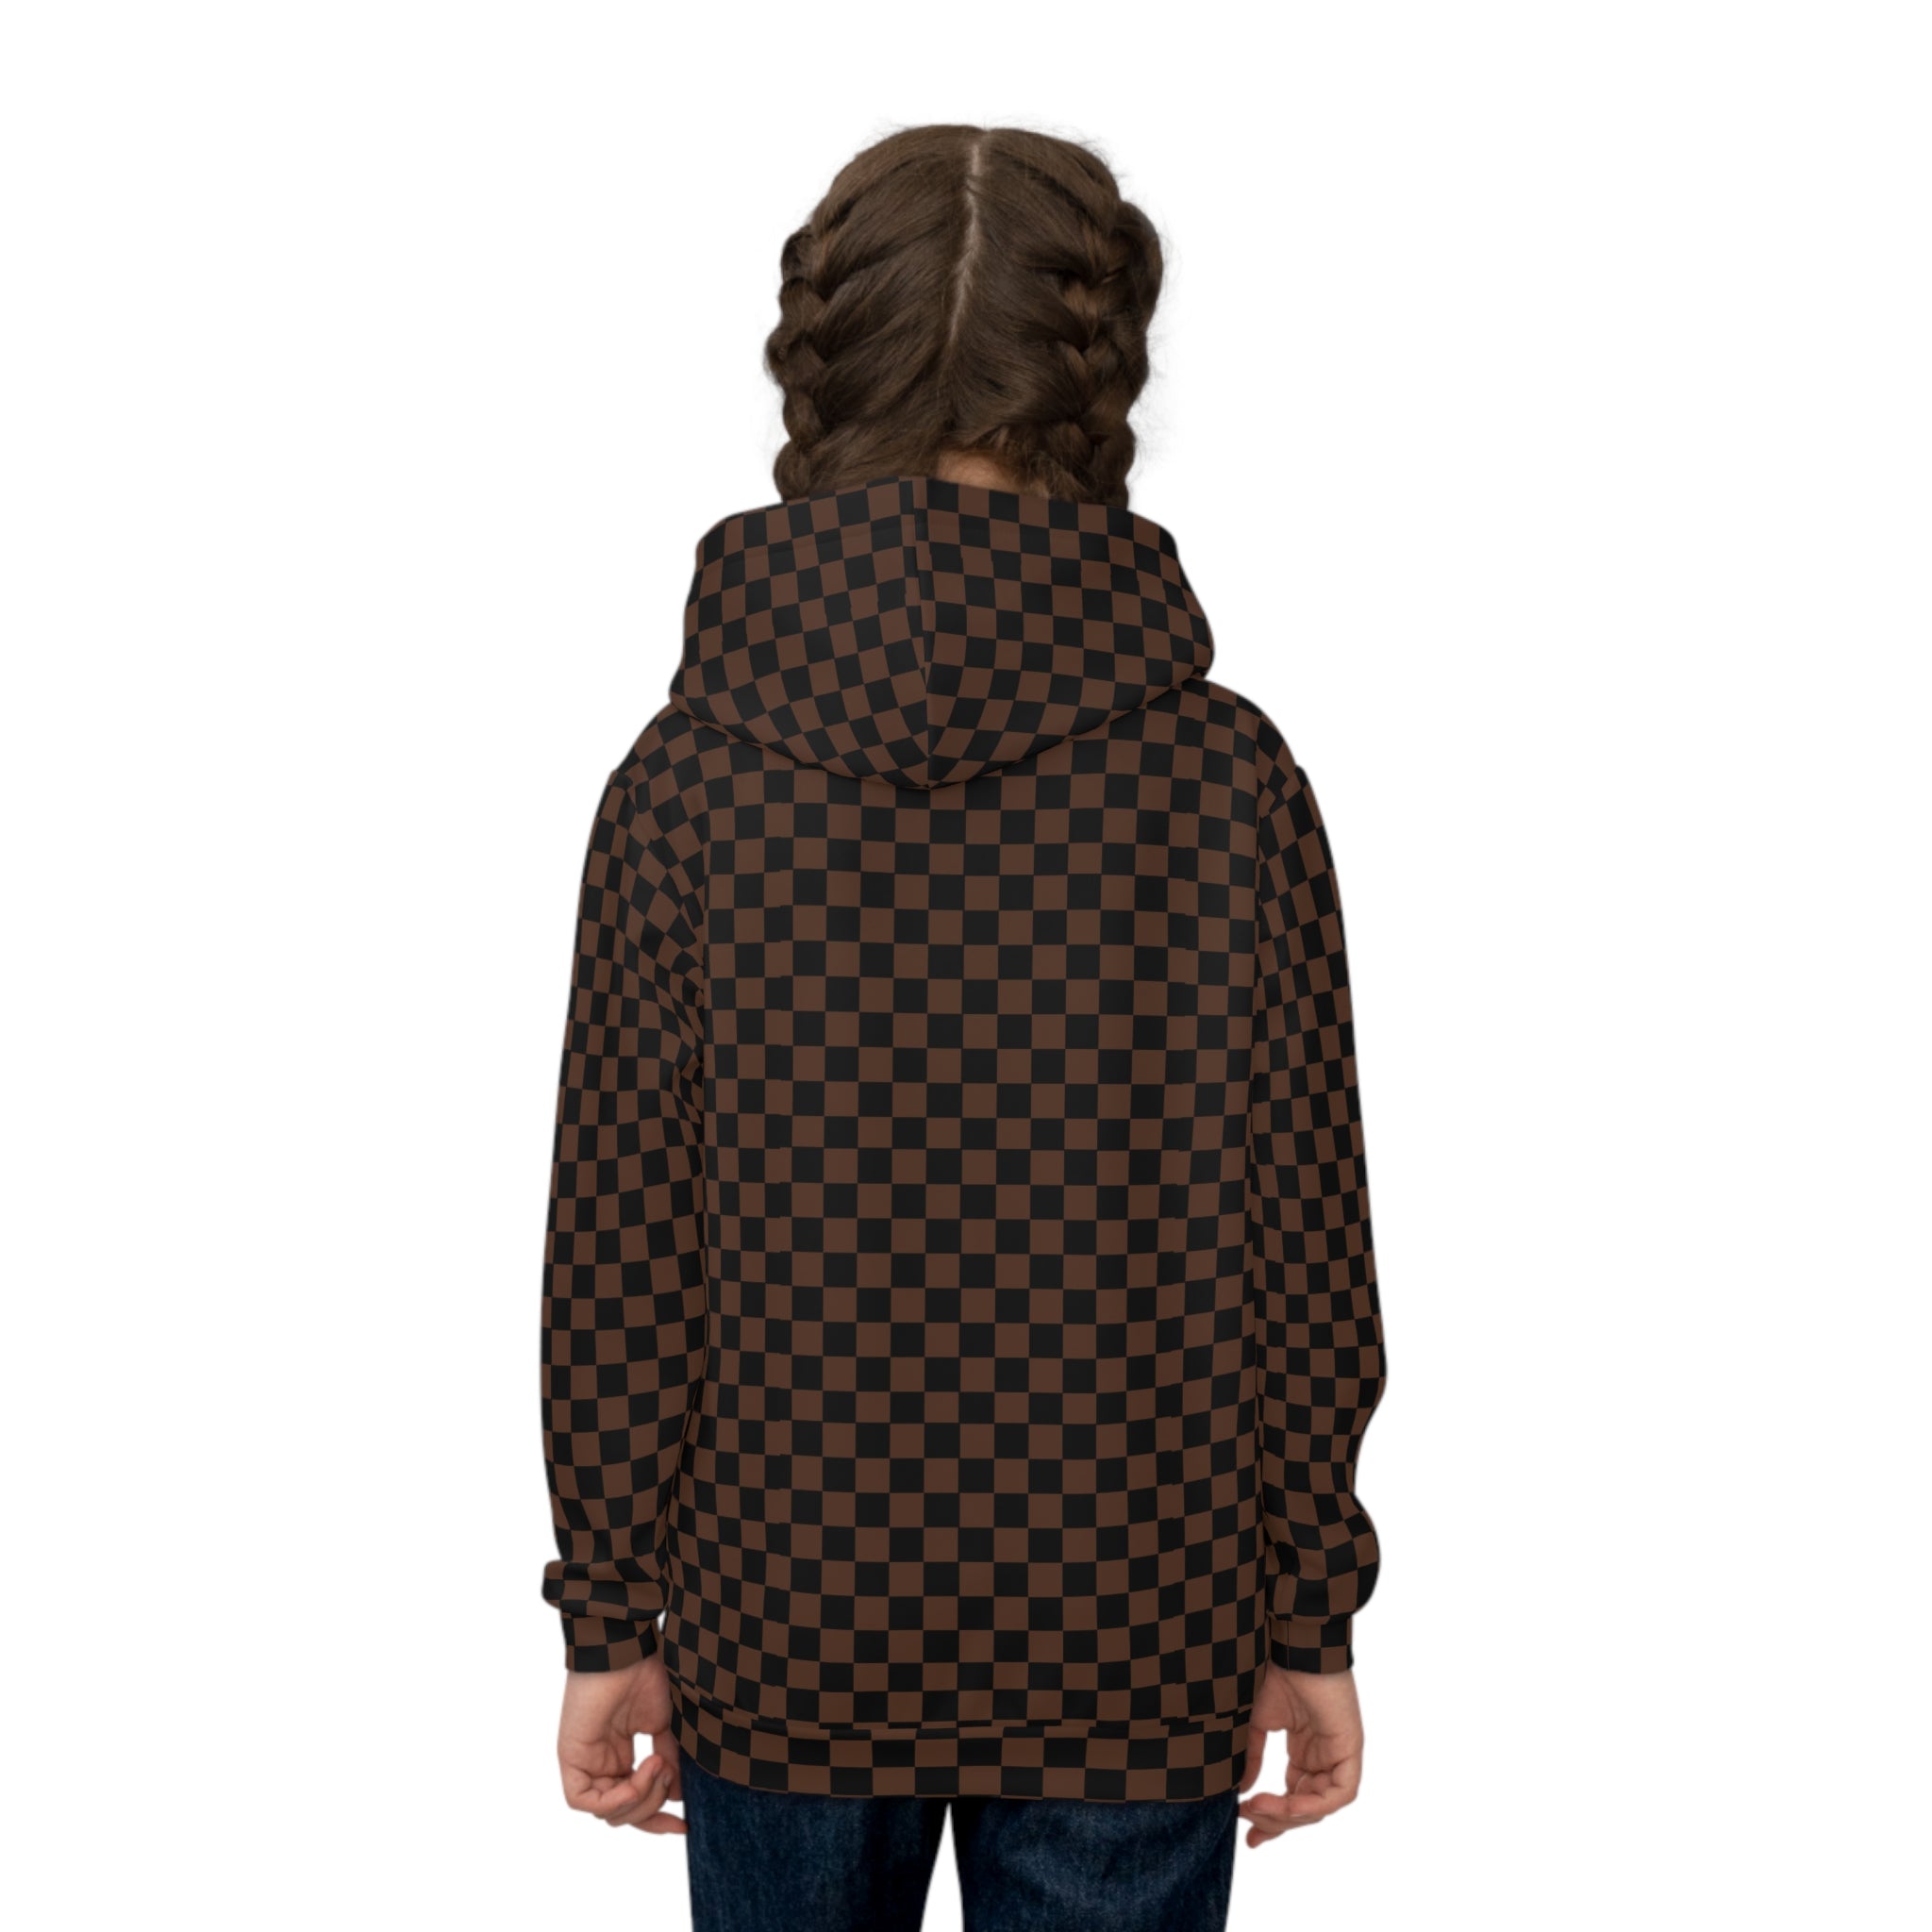 Brown Check Mate Children's Hoodie, Pullover Sweater for Children, Kids Fashionwear - The Middle Aged Groove